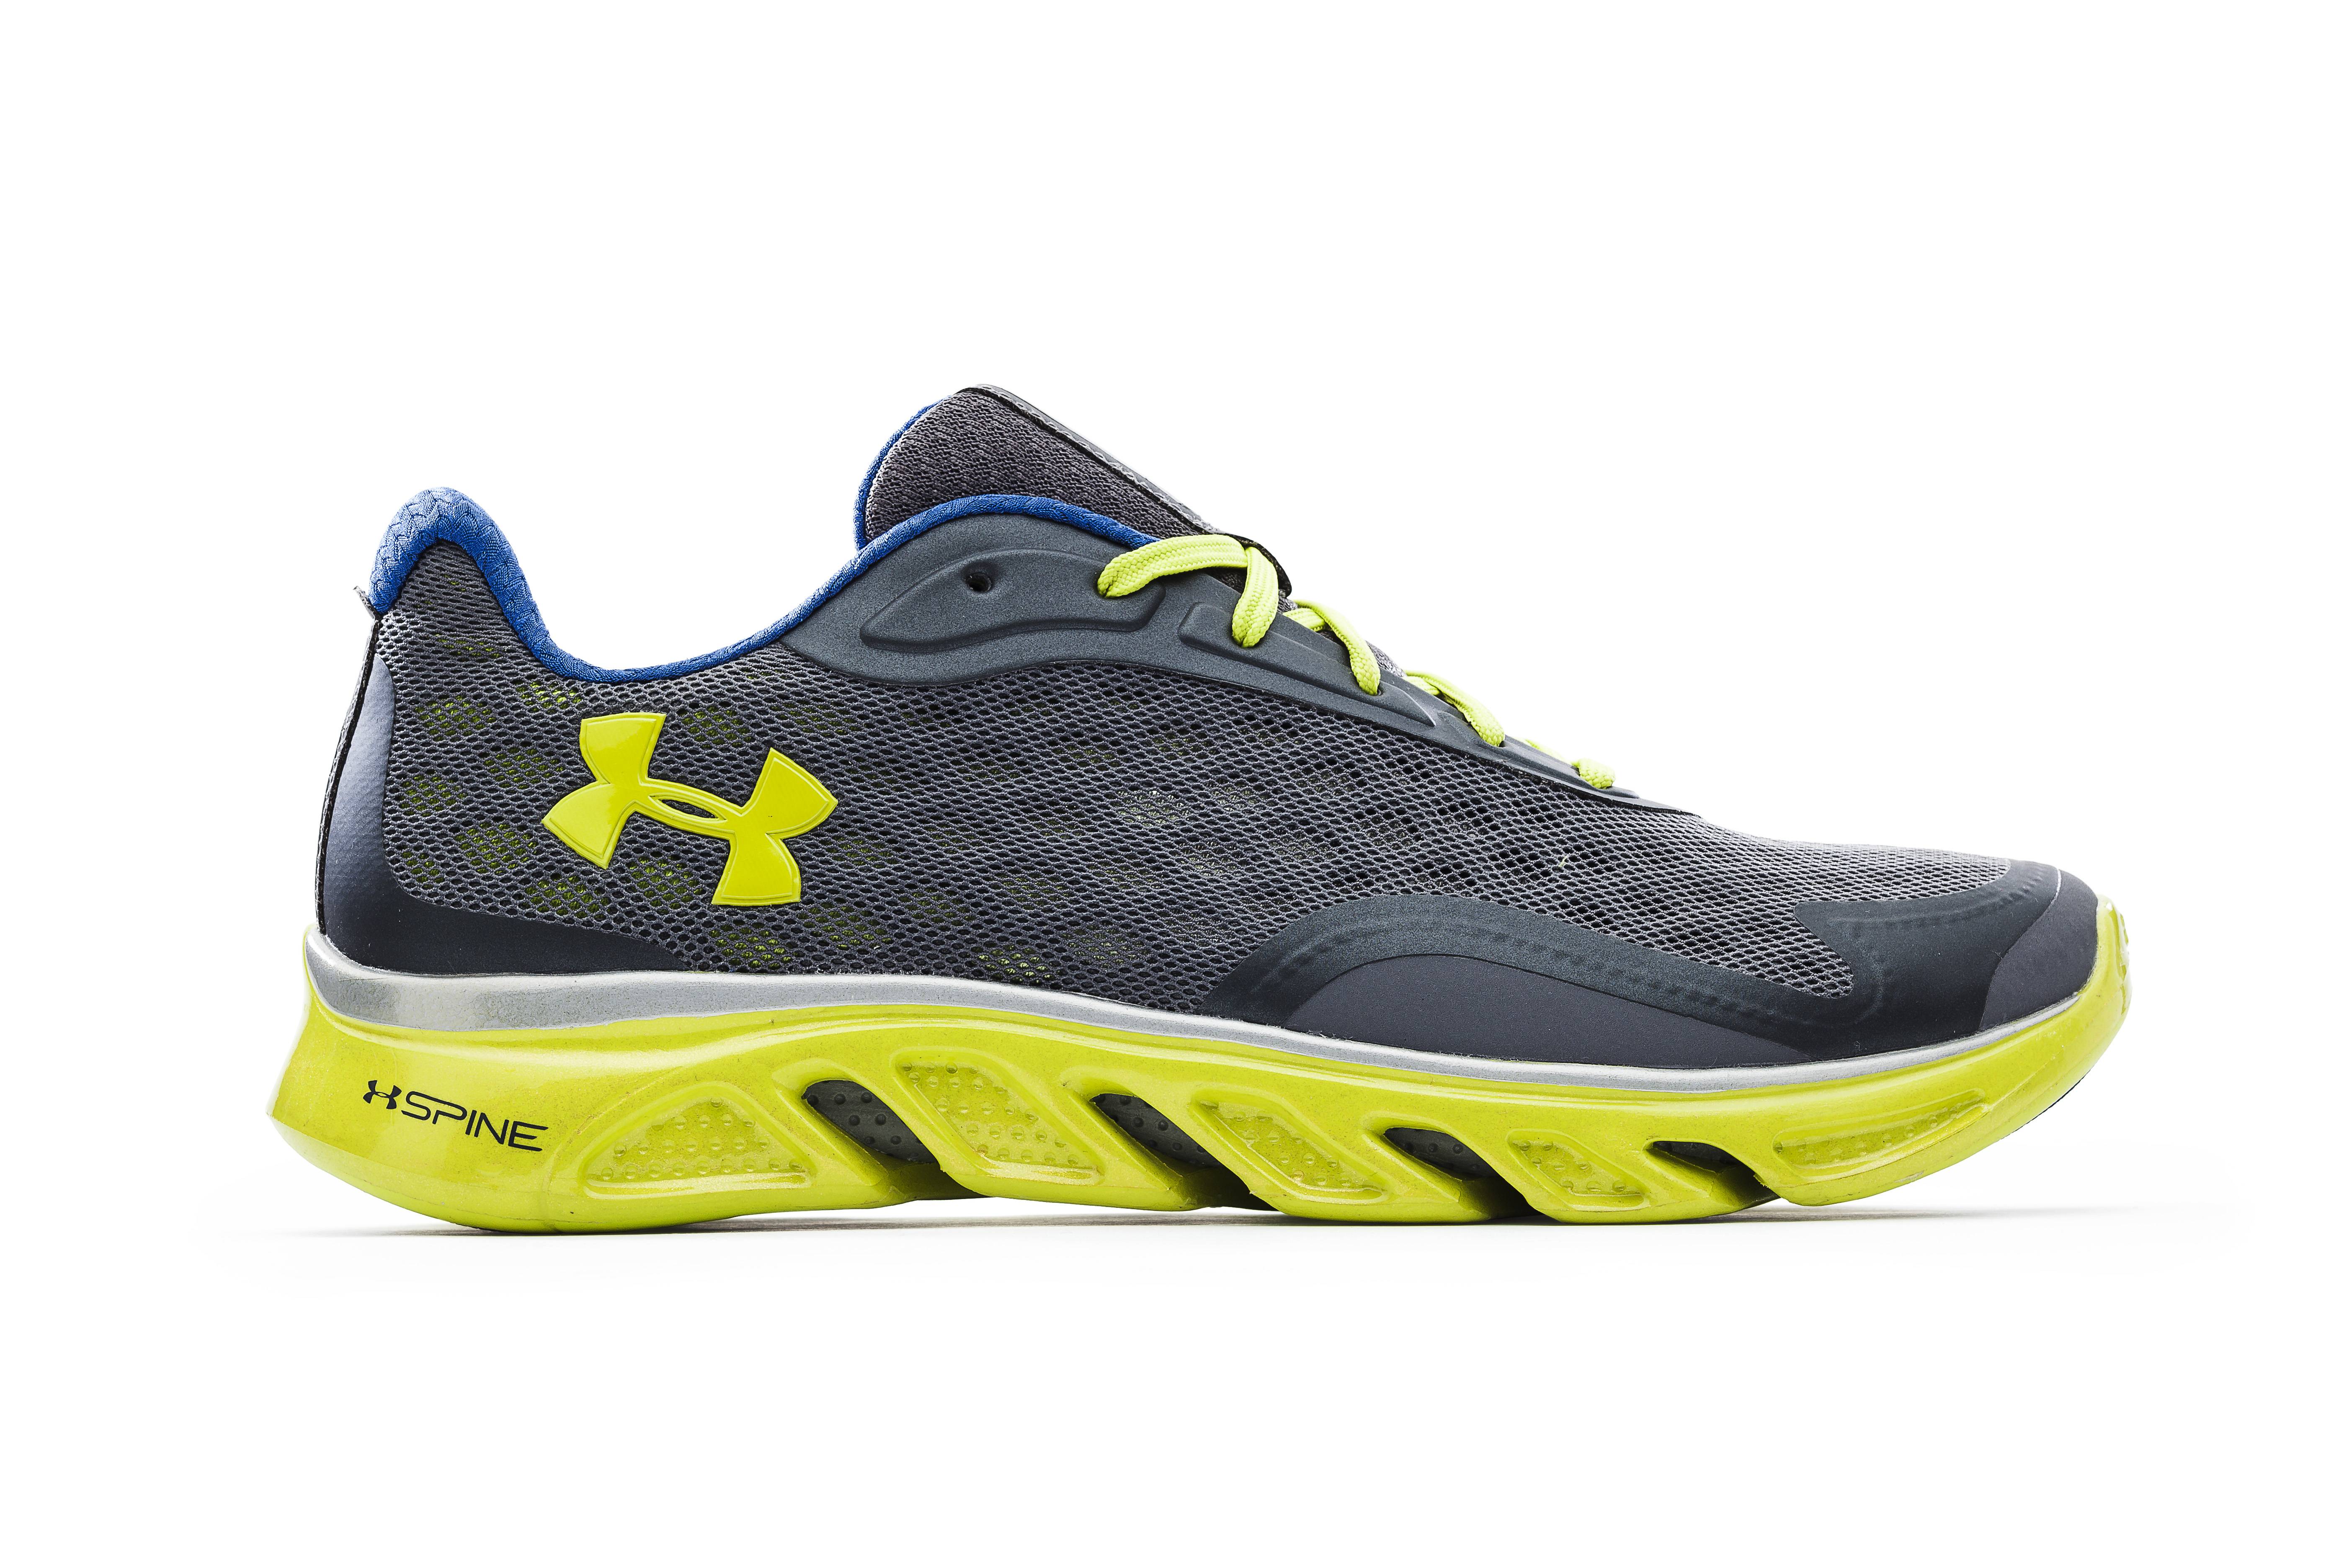 Under Armour Unveils New UA Spine RPM Running Footwear Collection With ...